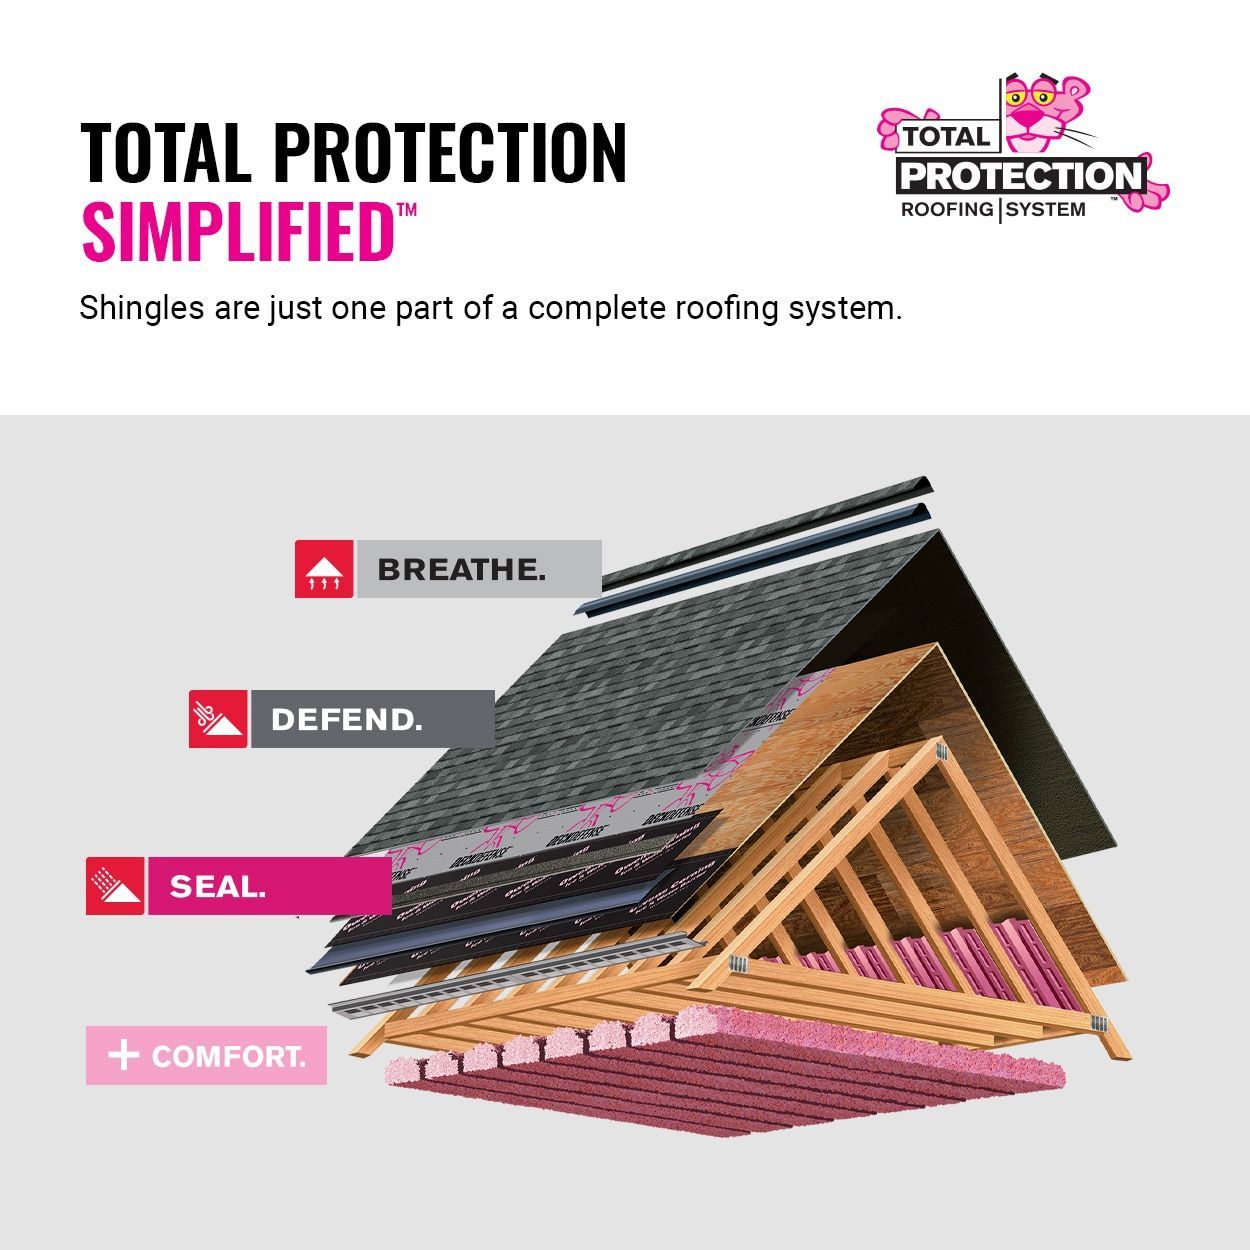 Total Protection Roofing System: A comprehensive roofing system installation featuring underlayment, shingles, and flashing for enhanced durability and weather resistance.